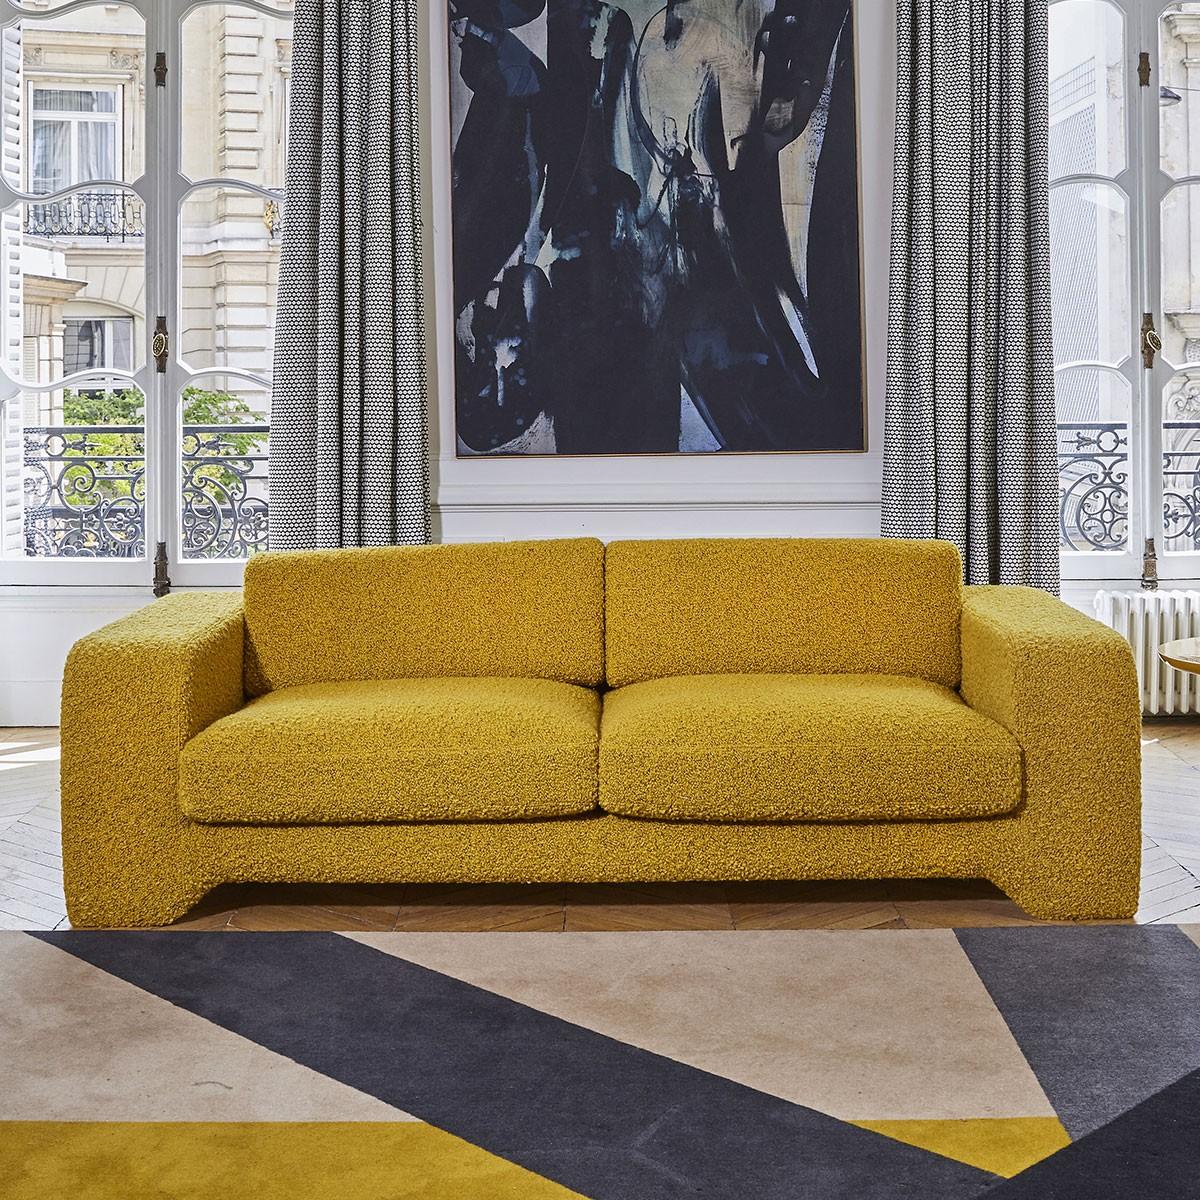 Popus Editions Giovanna 2.5 Seater Sofa in Egg Shell Off-White Como Velvet Fabric

Giovanna is a sofa with a strong profile. A sober, plush line, with this famous detail that changes everything, so as not to forget its strength of character and